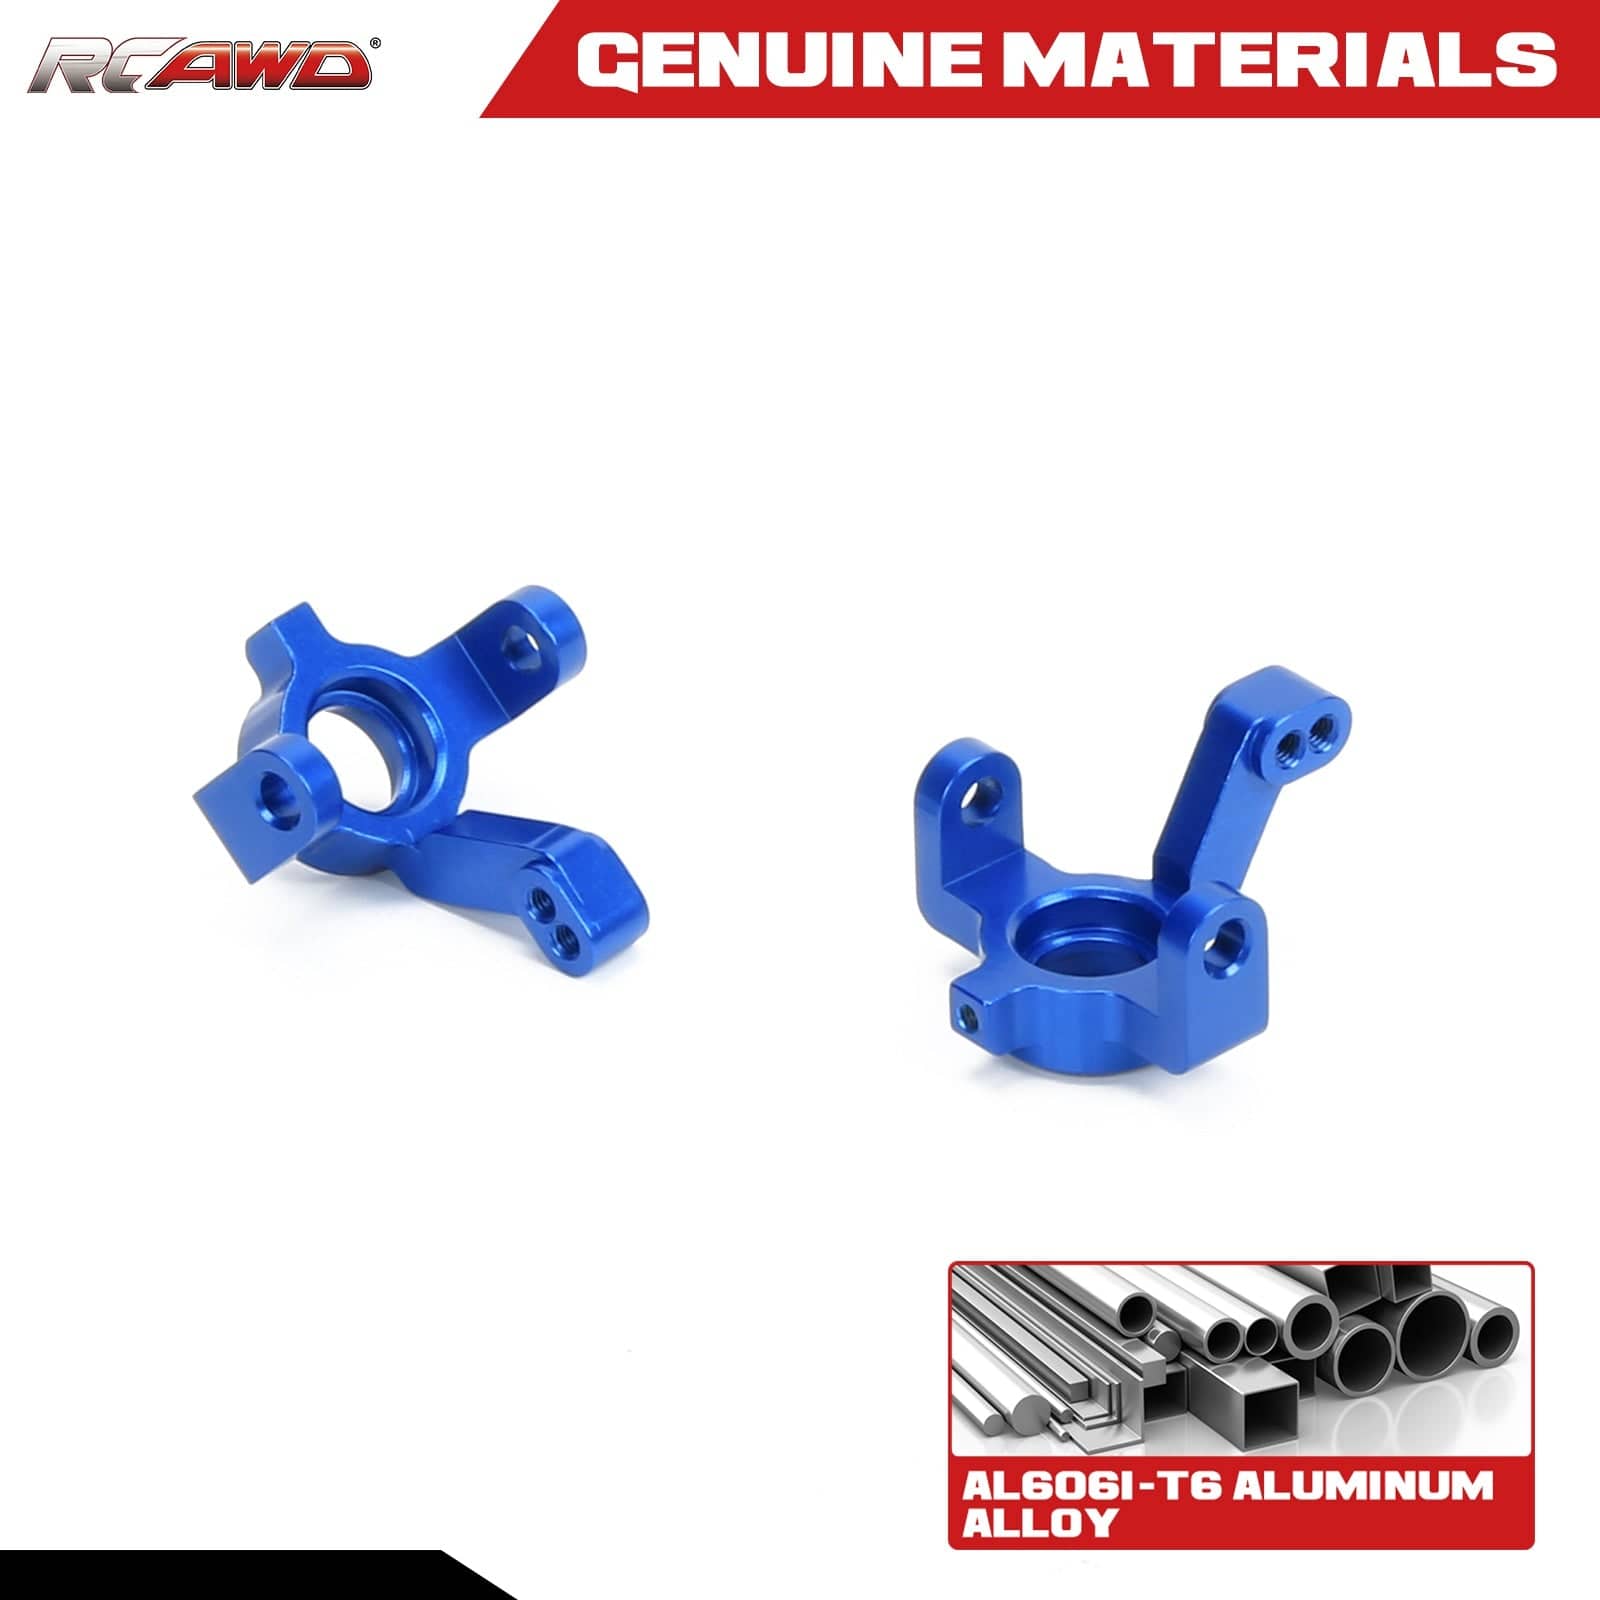 RCAWD RC Aluminum Steering Blocks & Carriers Stub Axle & Caster blocks (c - hubs) Set for 1/18 Traxxas Latrax Upgrades - RCAWD